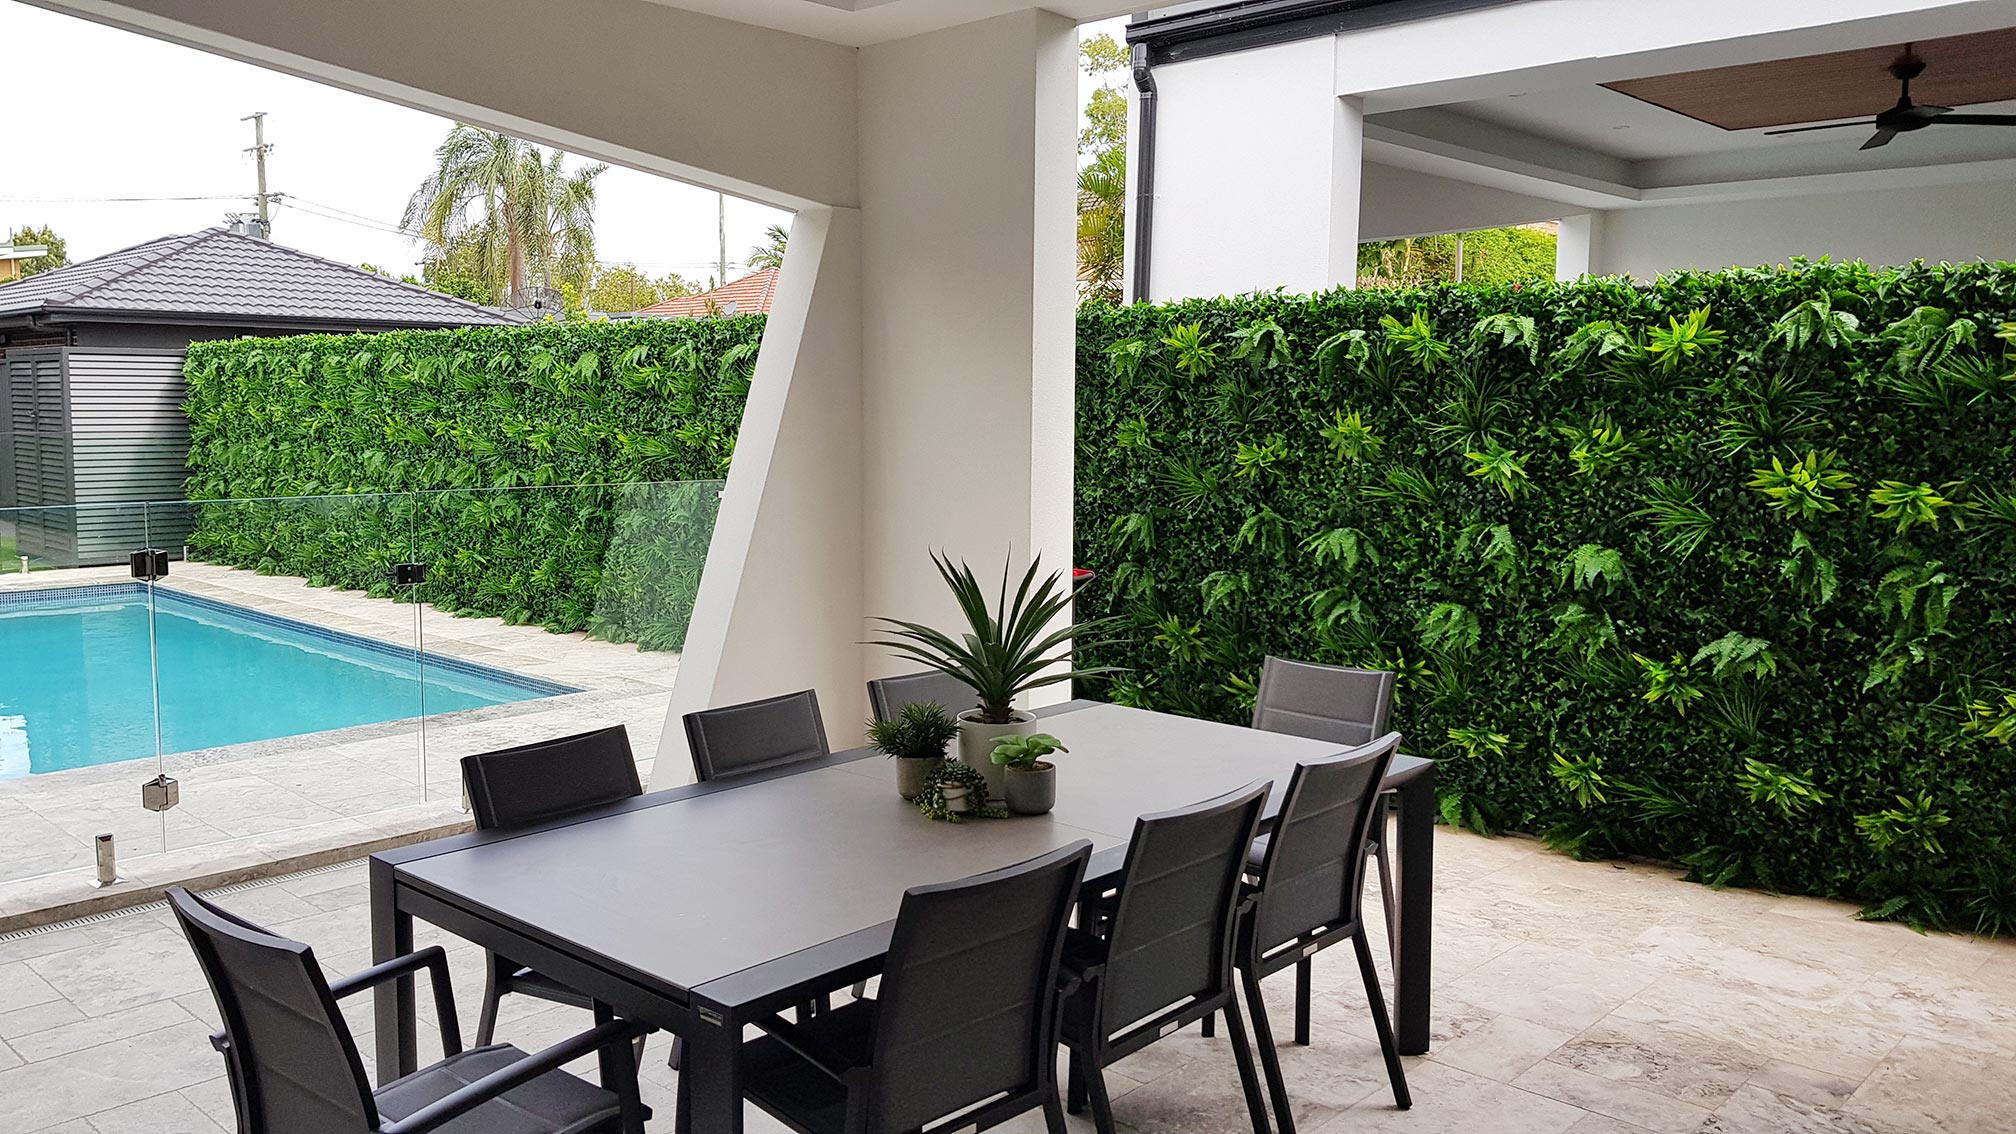 Best Poolside Greenery Designs for FY2021